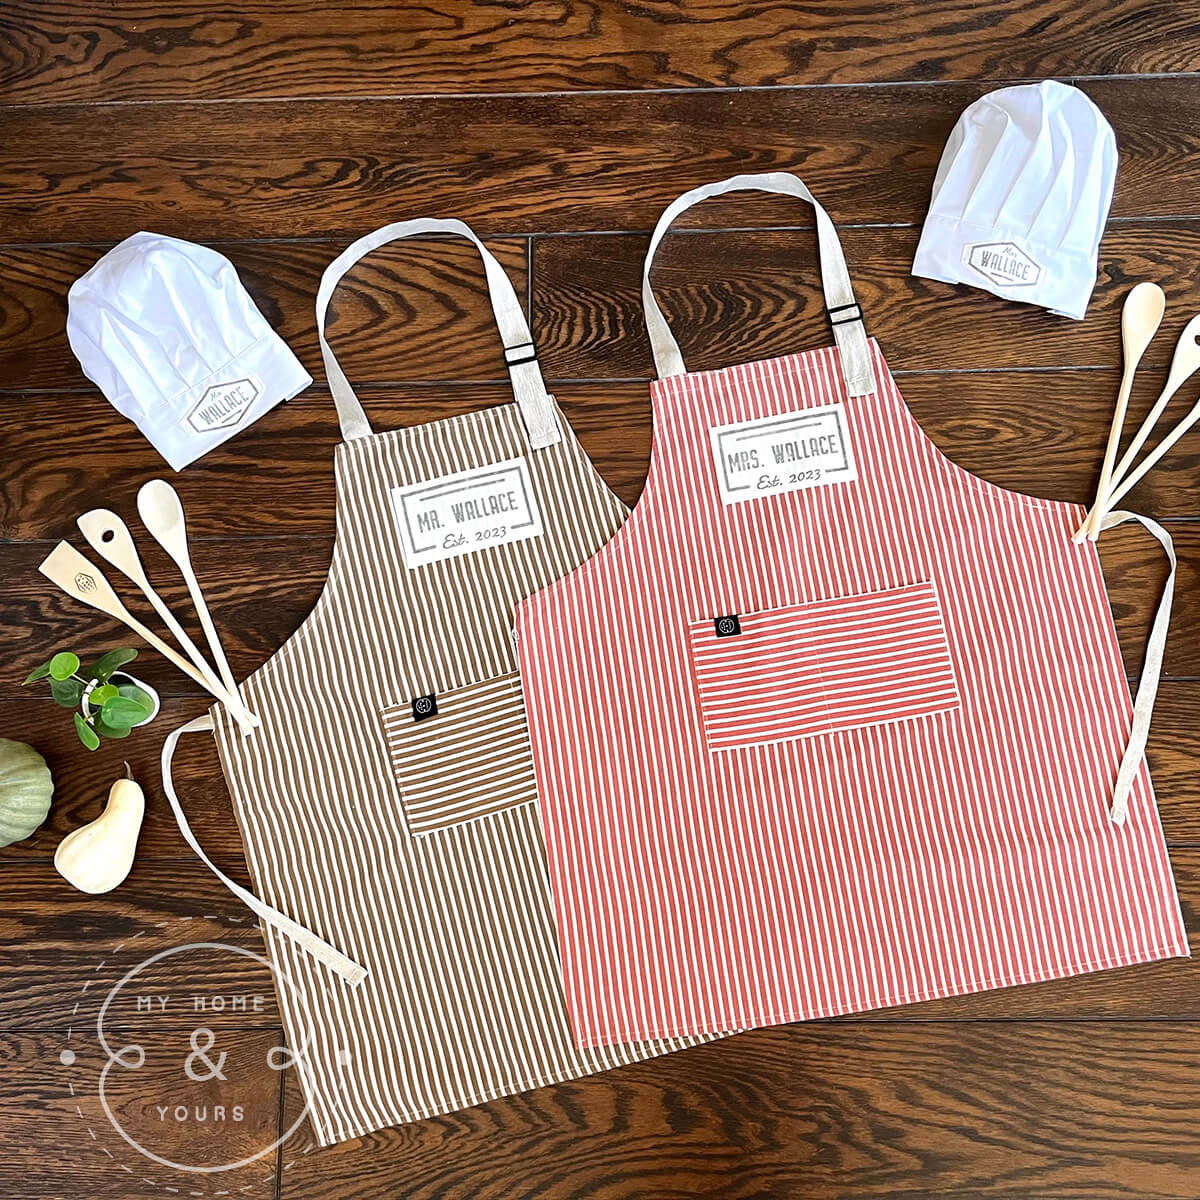 unique custom quality aprons for couples as anniversary or wedding gifts